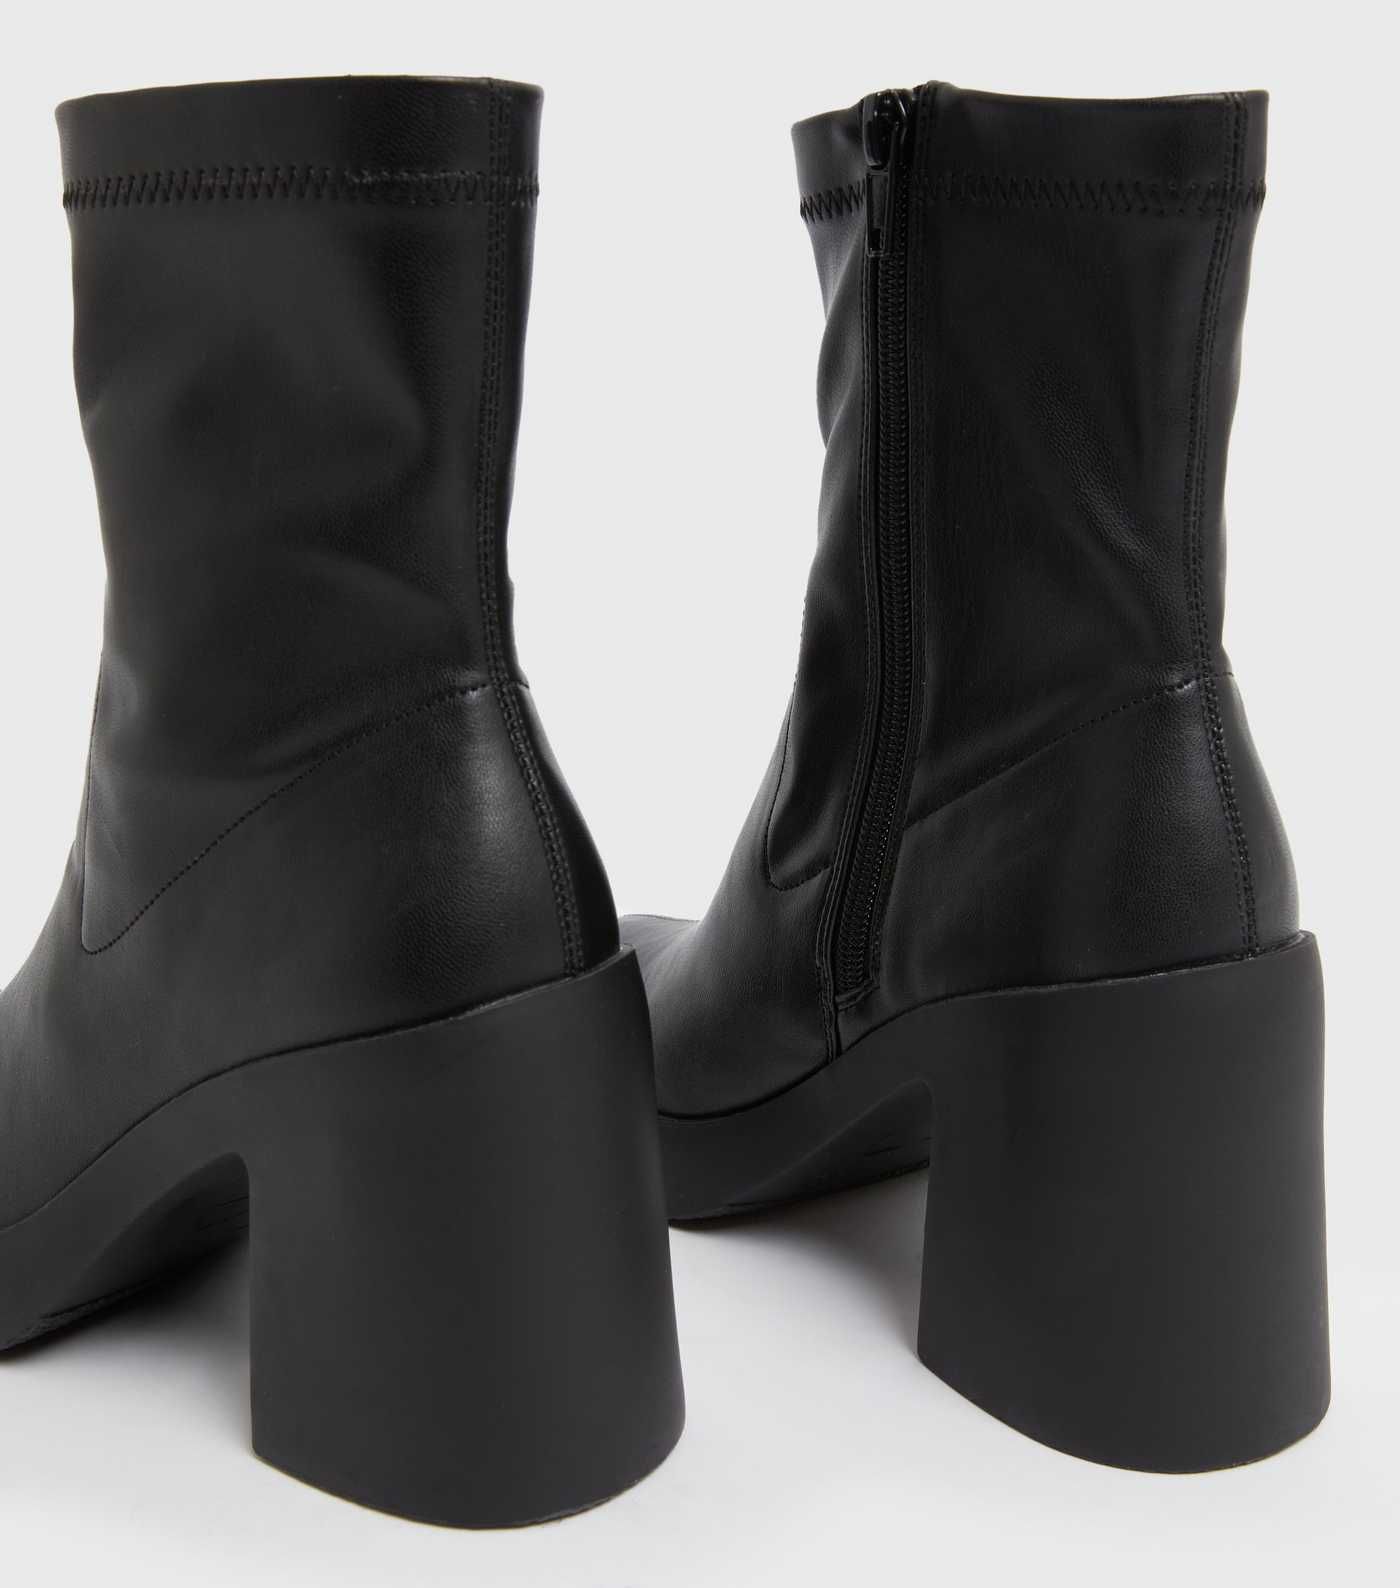 Black Leather-Look Chunky Block Heel Sock Boots
						
						Add to Saved Items
						Remove from... | New Look (UK)